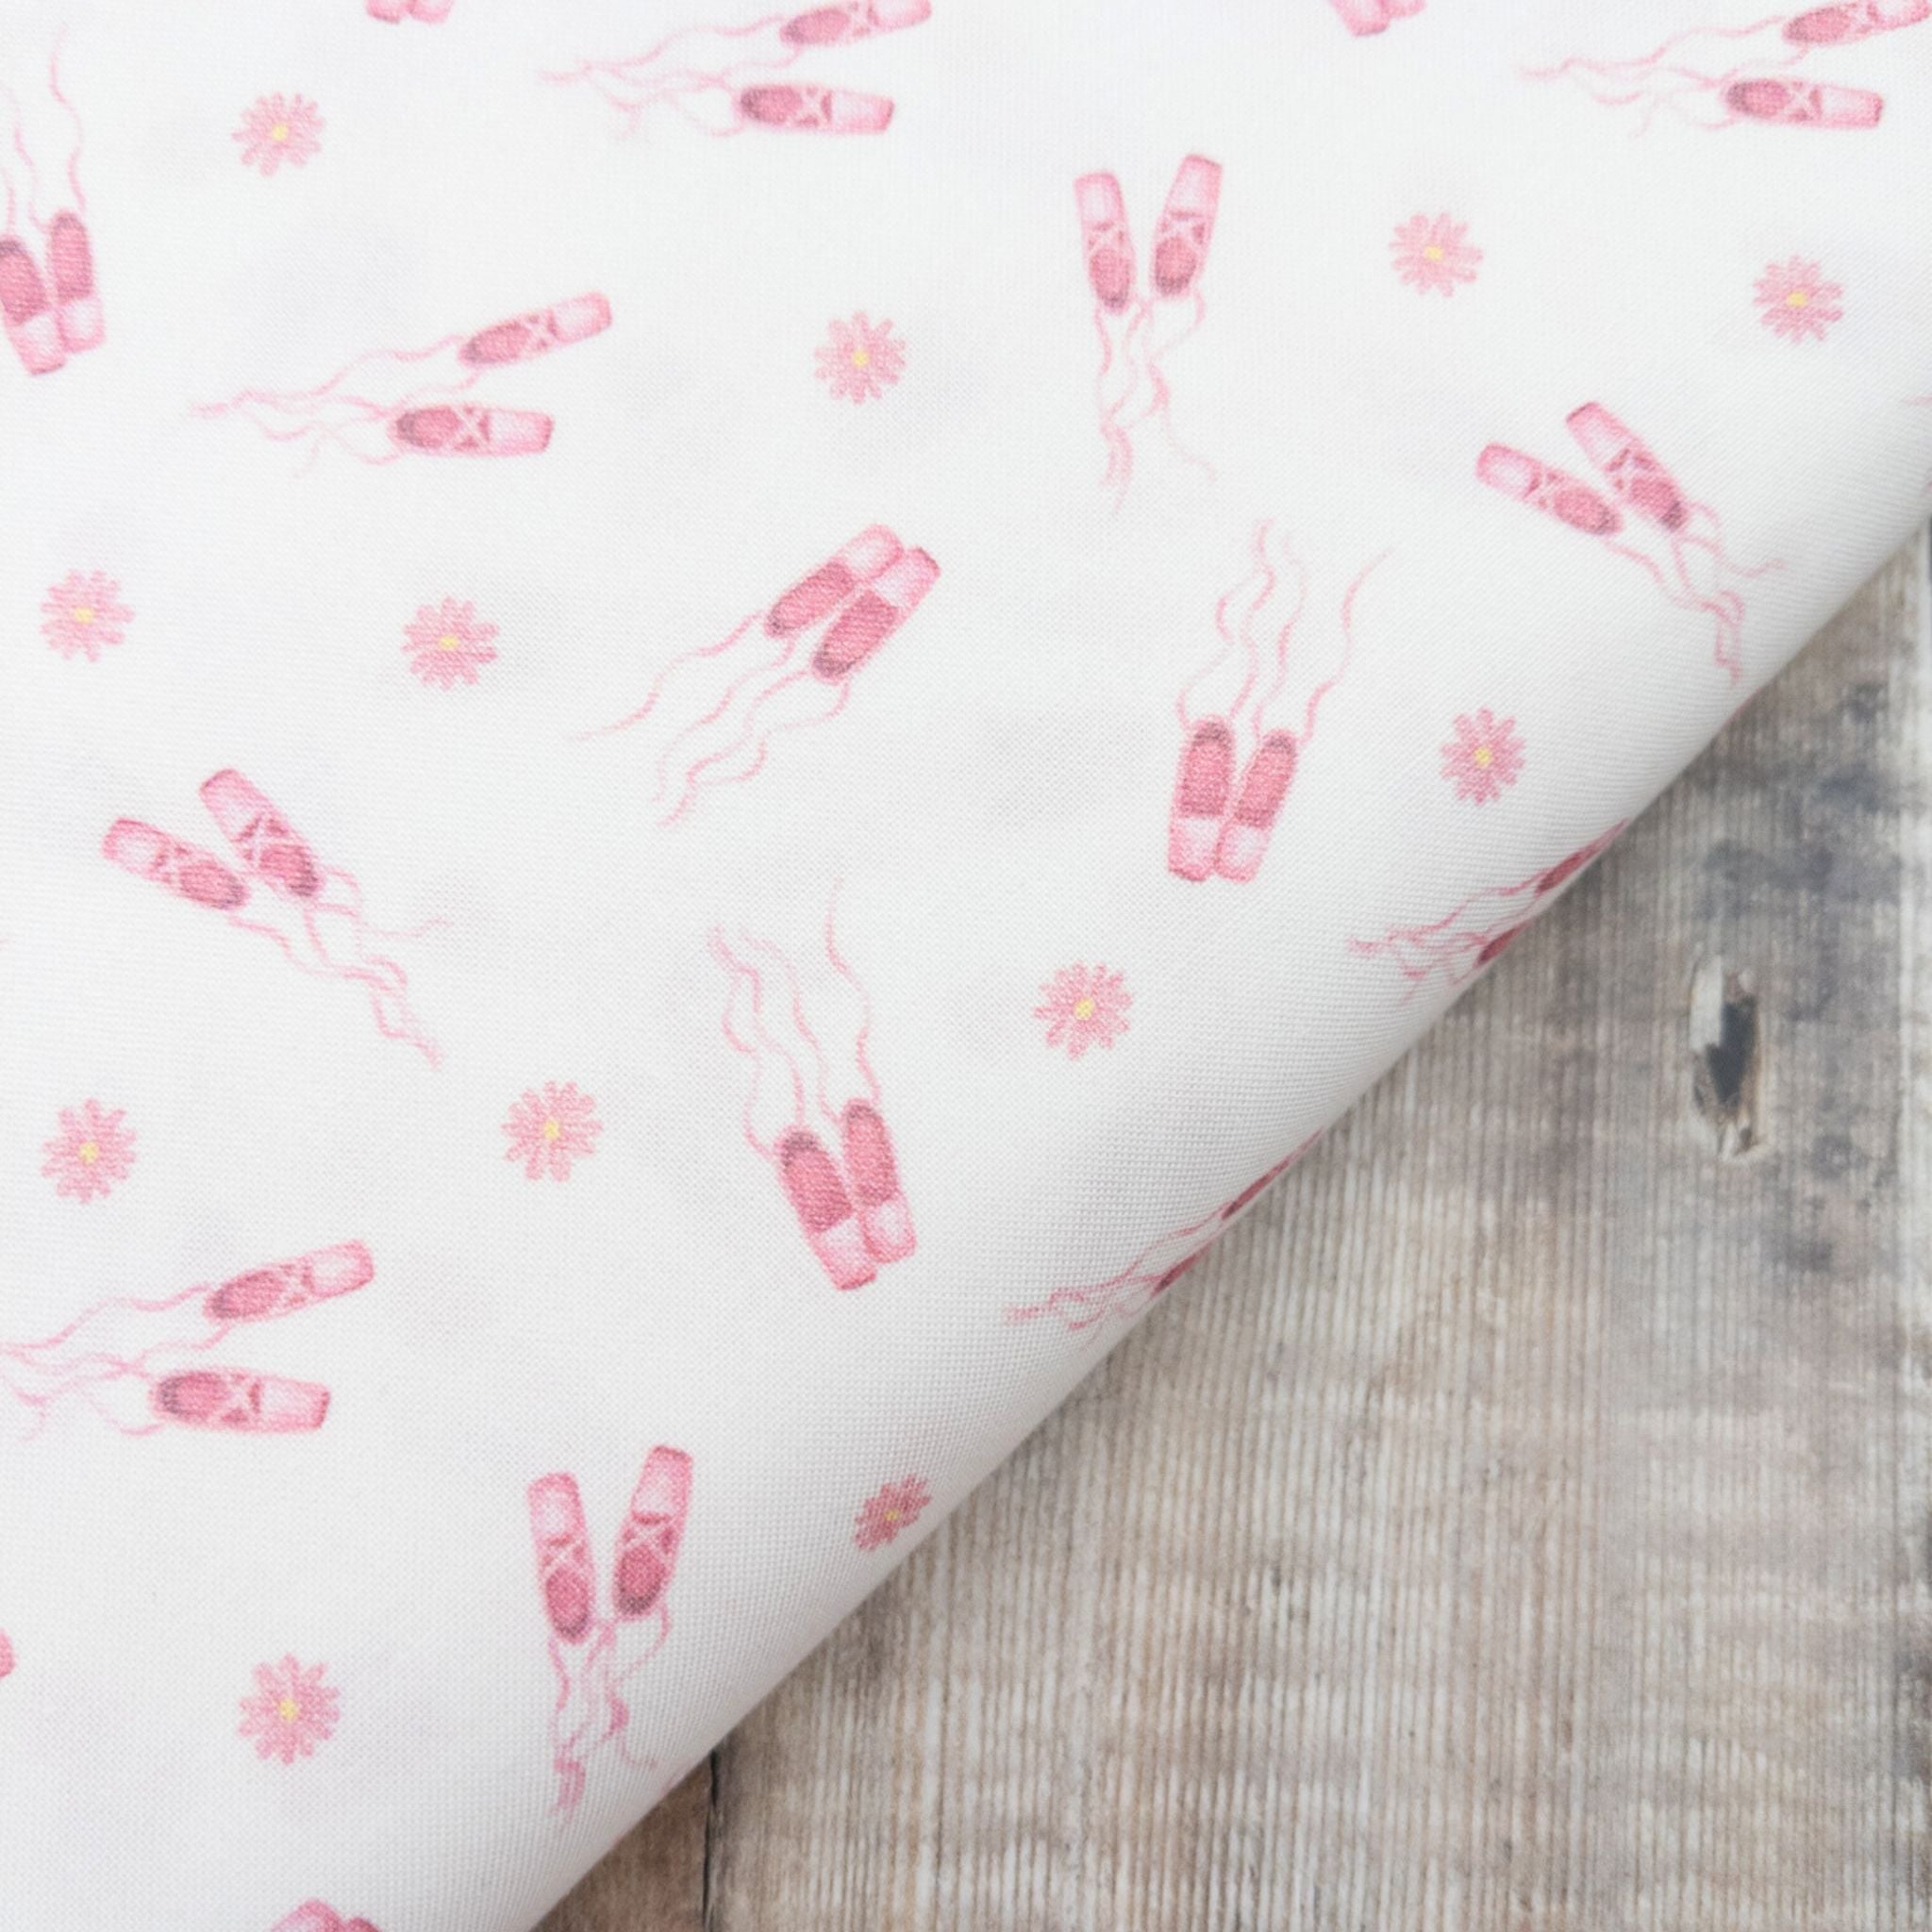 Ballet slippers on blush pink cotton fabric - Ballet Bunnies - Timeless Treasures